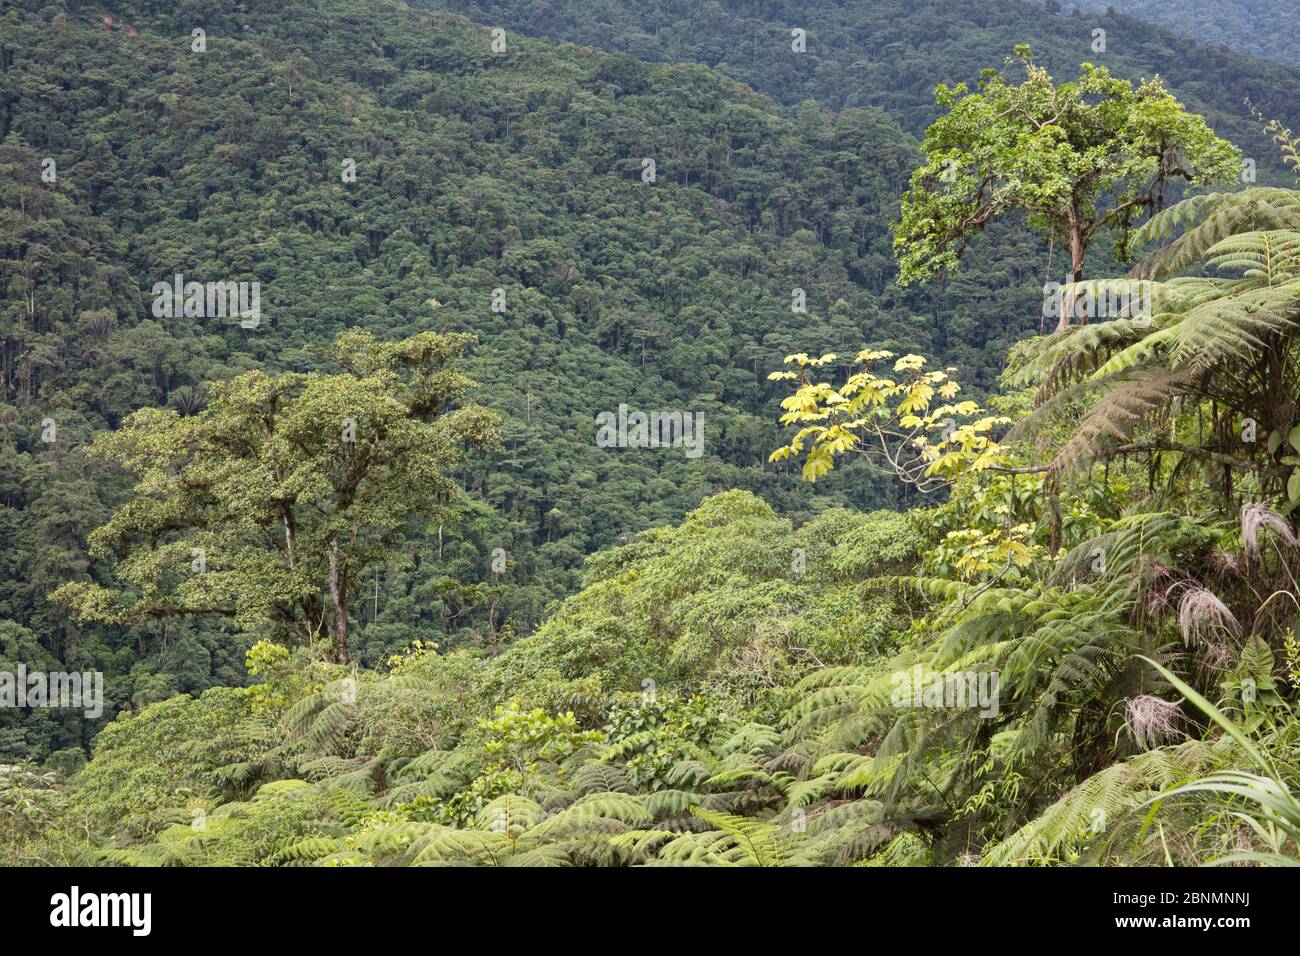 Cloud forest canopy on clear morning, Province El Oro, Buenaventura Biological Reserve, Ecuador Stock Photo